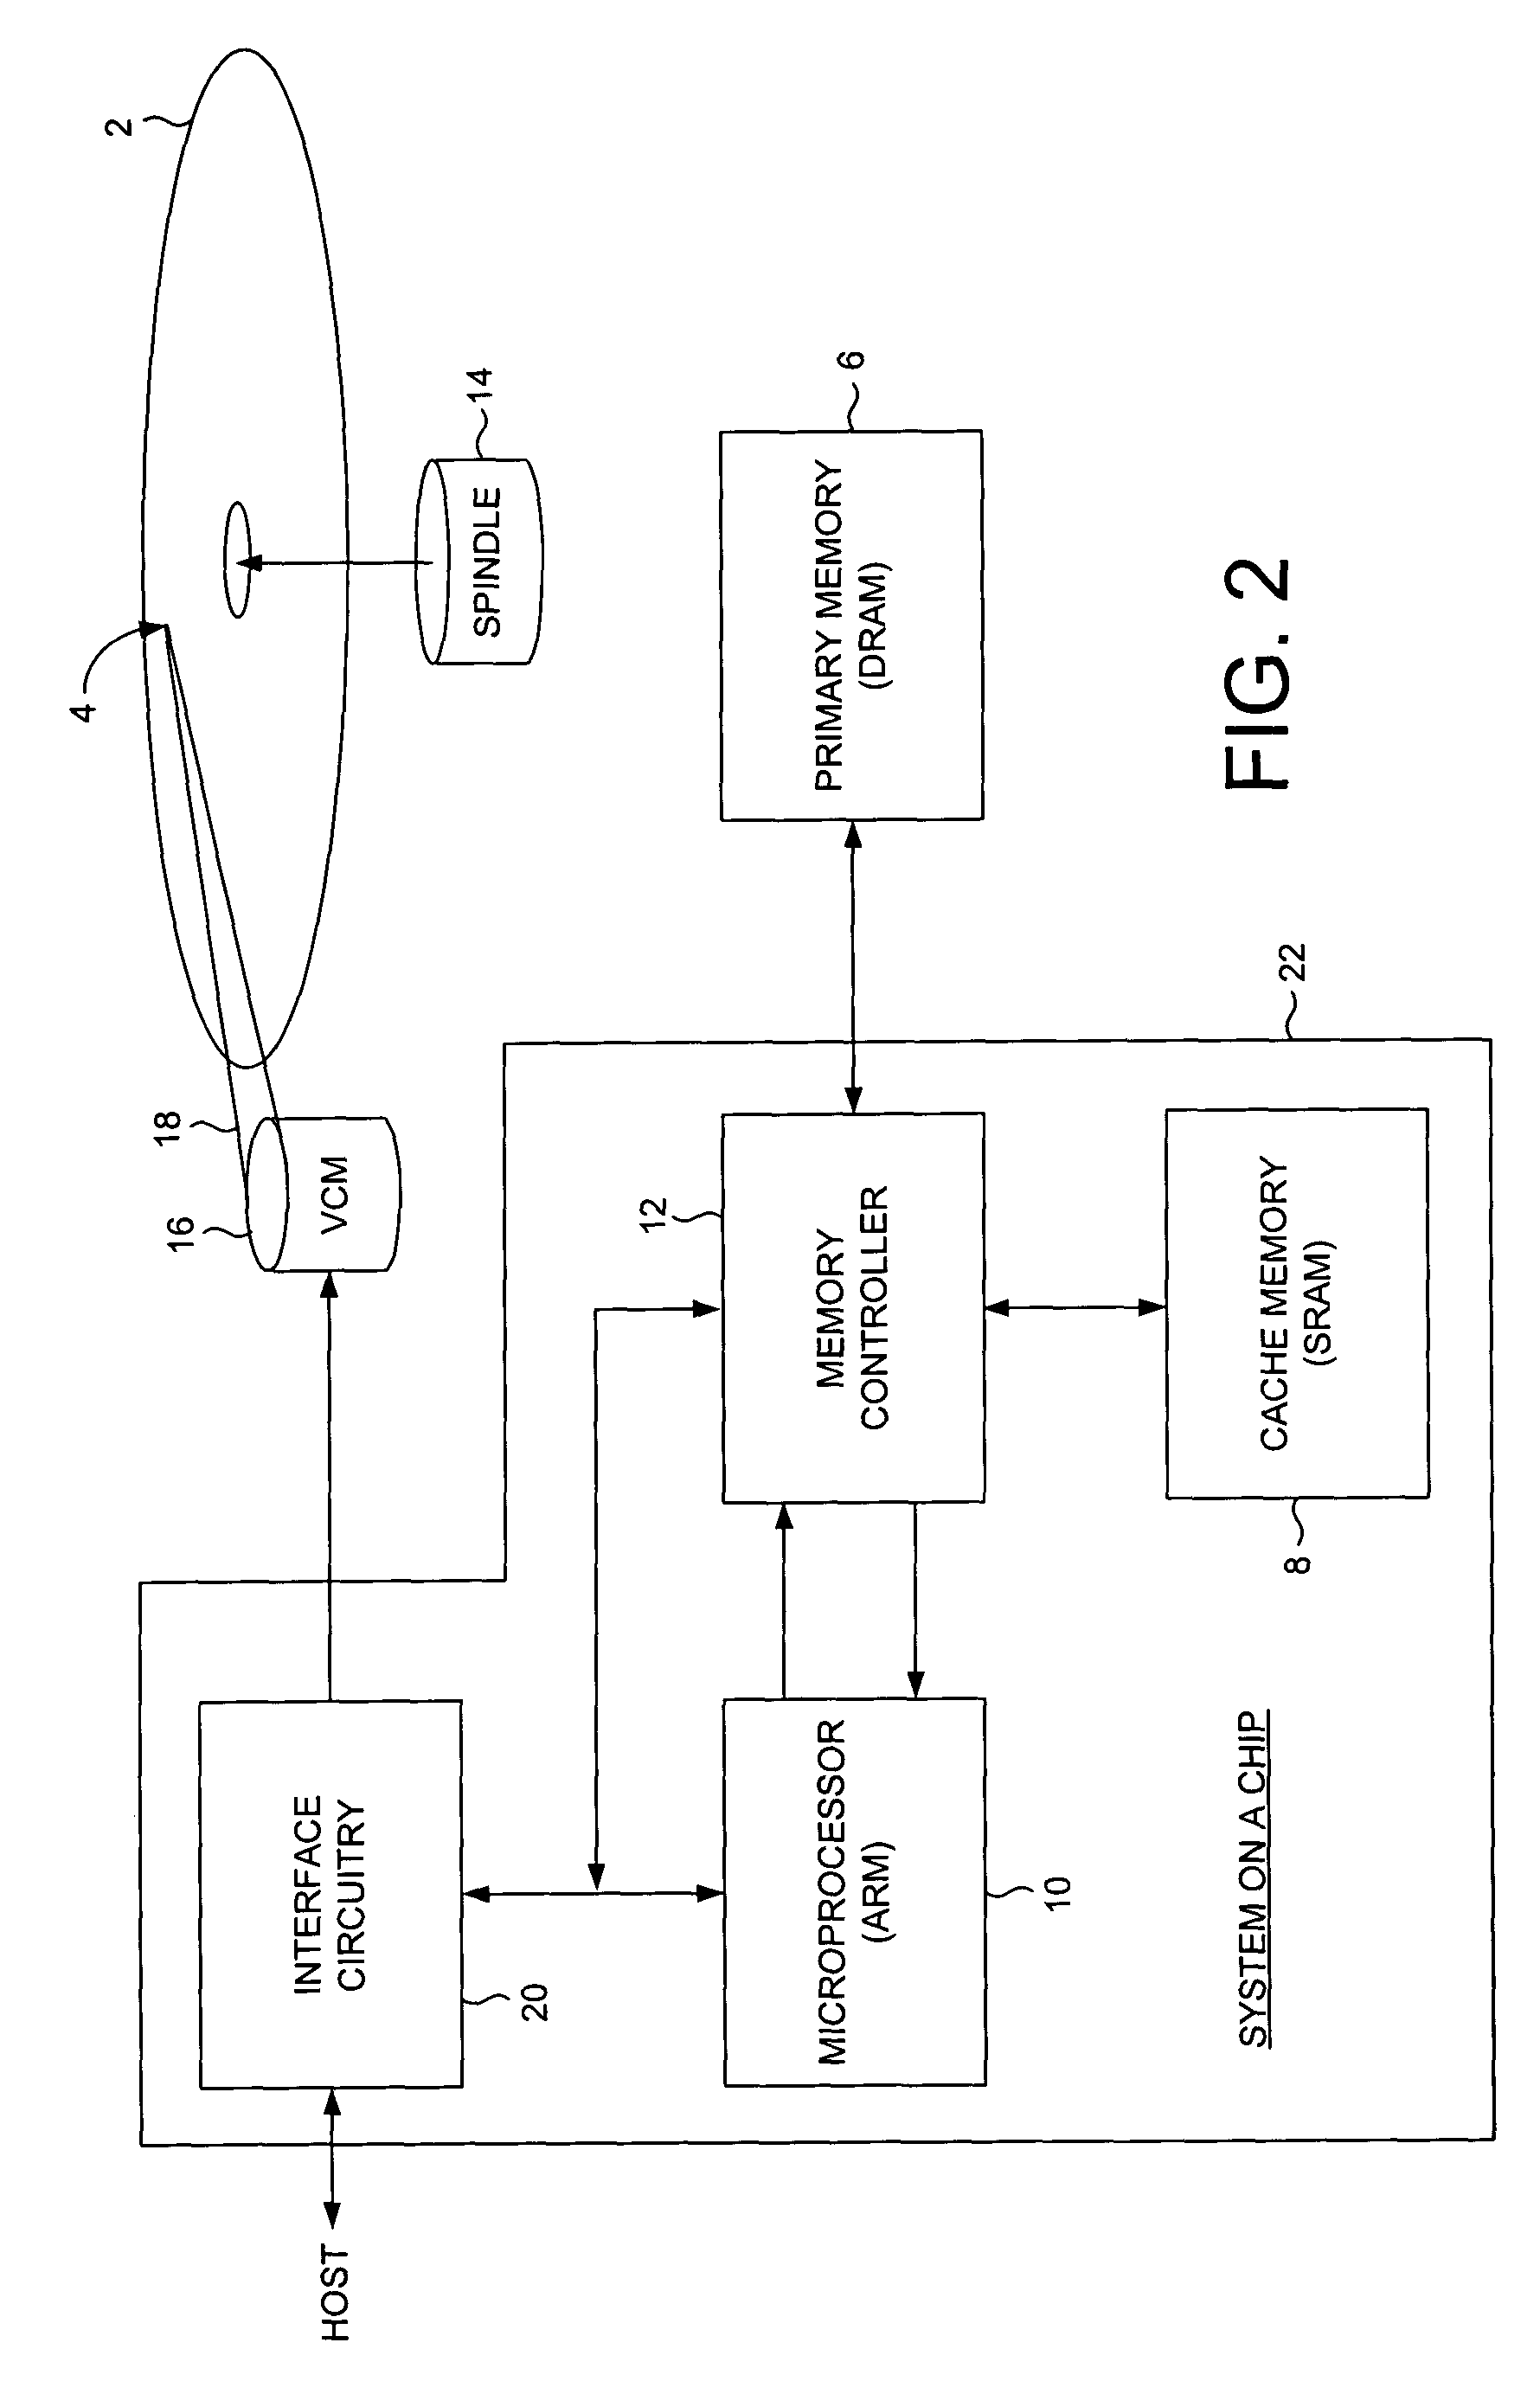 Disk drive employing enhanced instruction cache management to facilitate non-sequential immediate operands